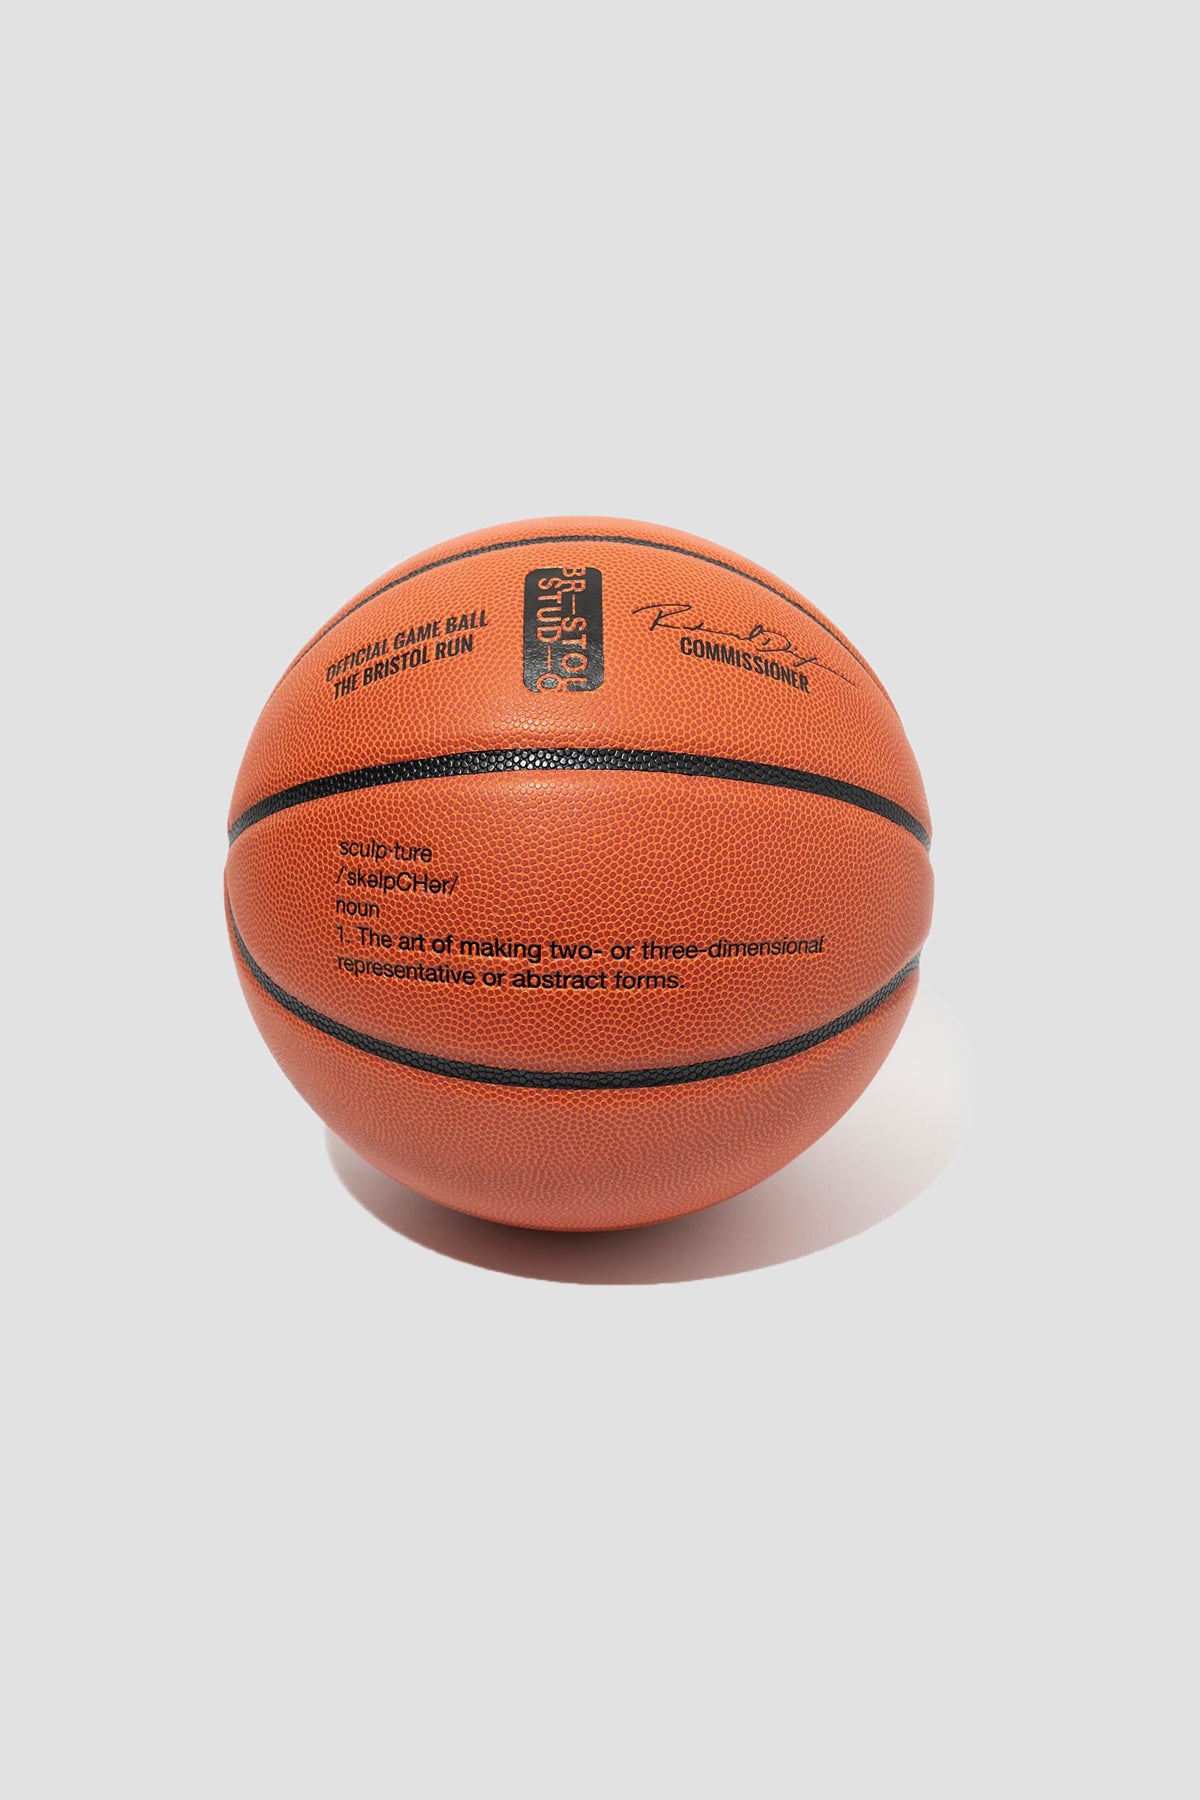 Official Game Ball